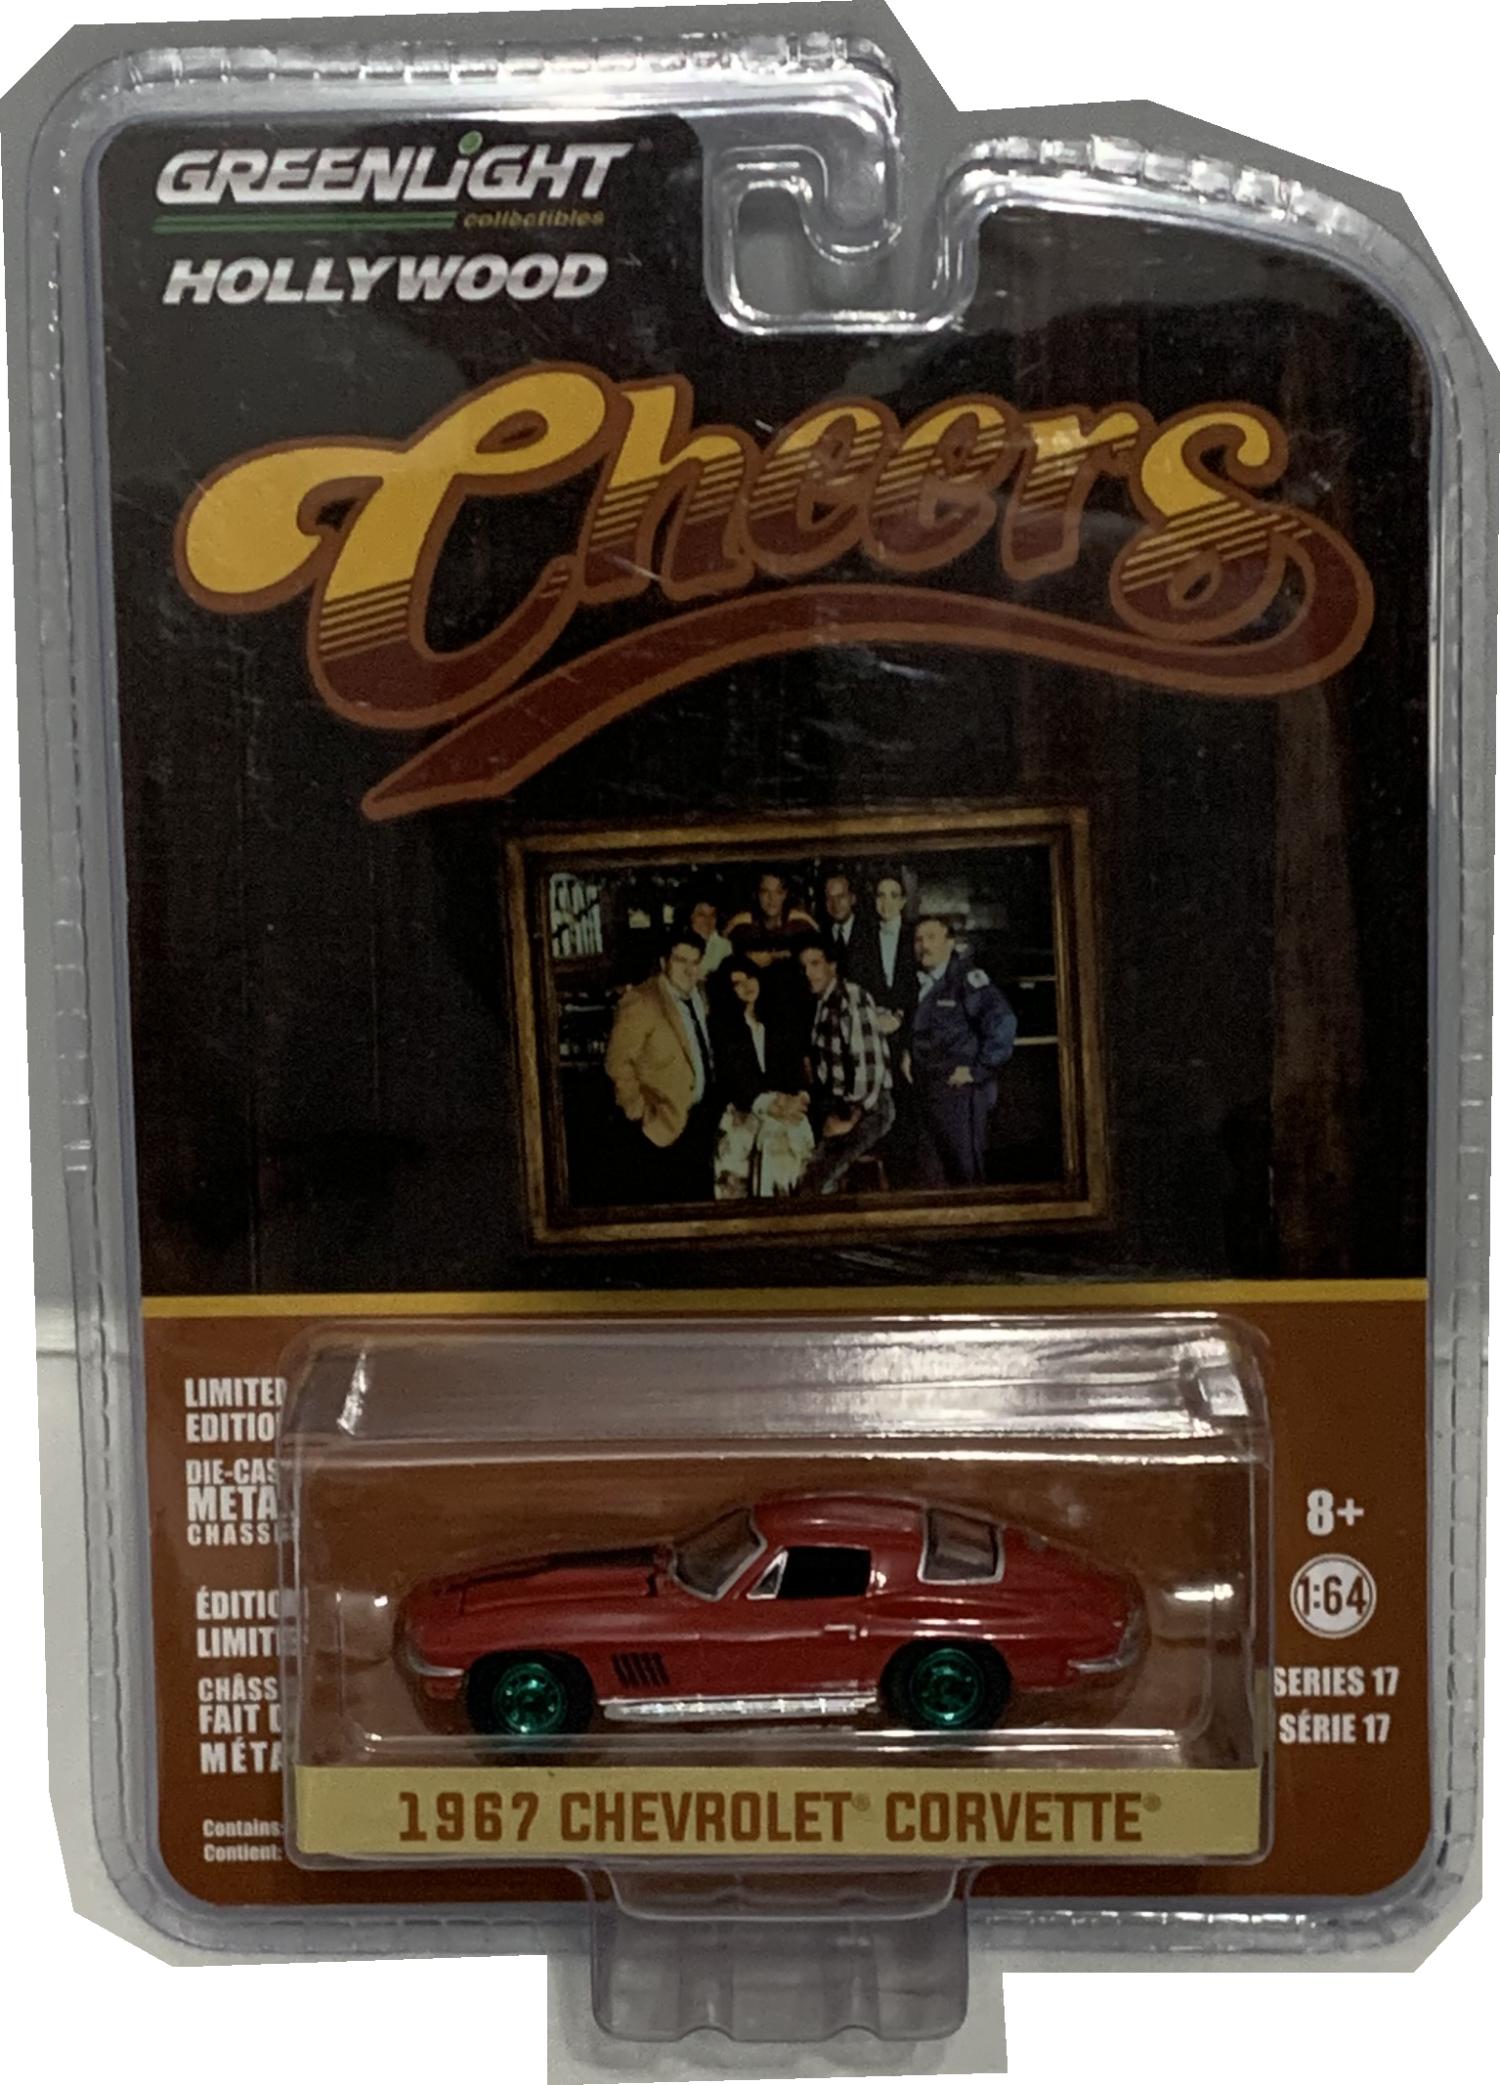 Cheers 1967 Sam’s Chevrolet Corvette in red 1:64 scale from Greenlight, Green Wheel Version, limited edition model